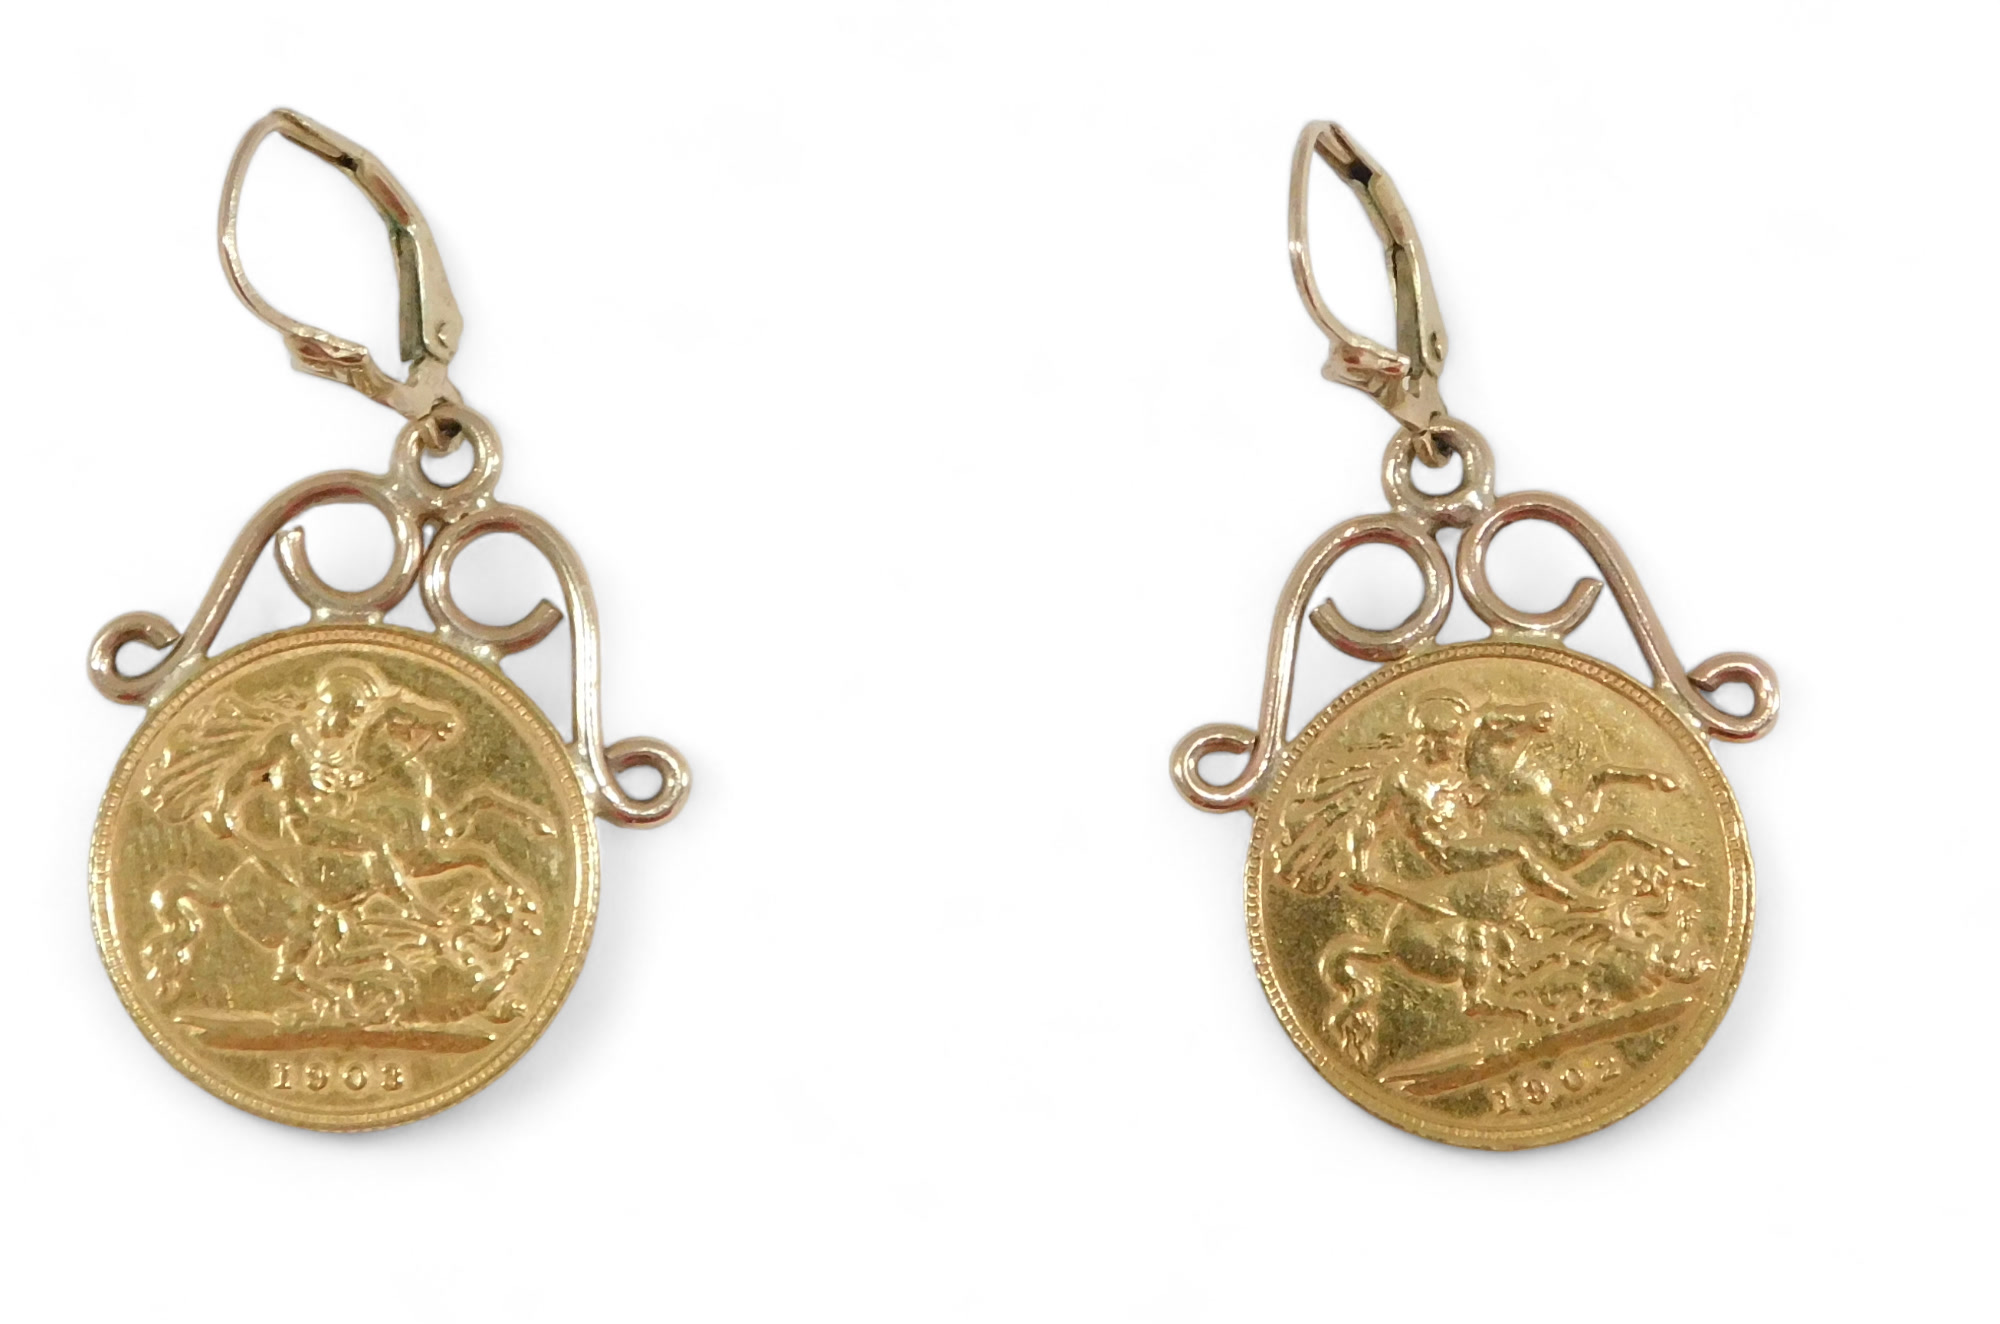 A pair of Edward VII half gold sovereign earrings, dated 1902 and 1903, with applied 9ct gold earrin